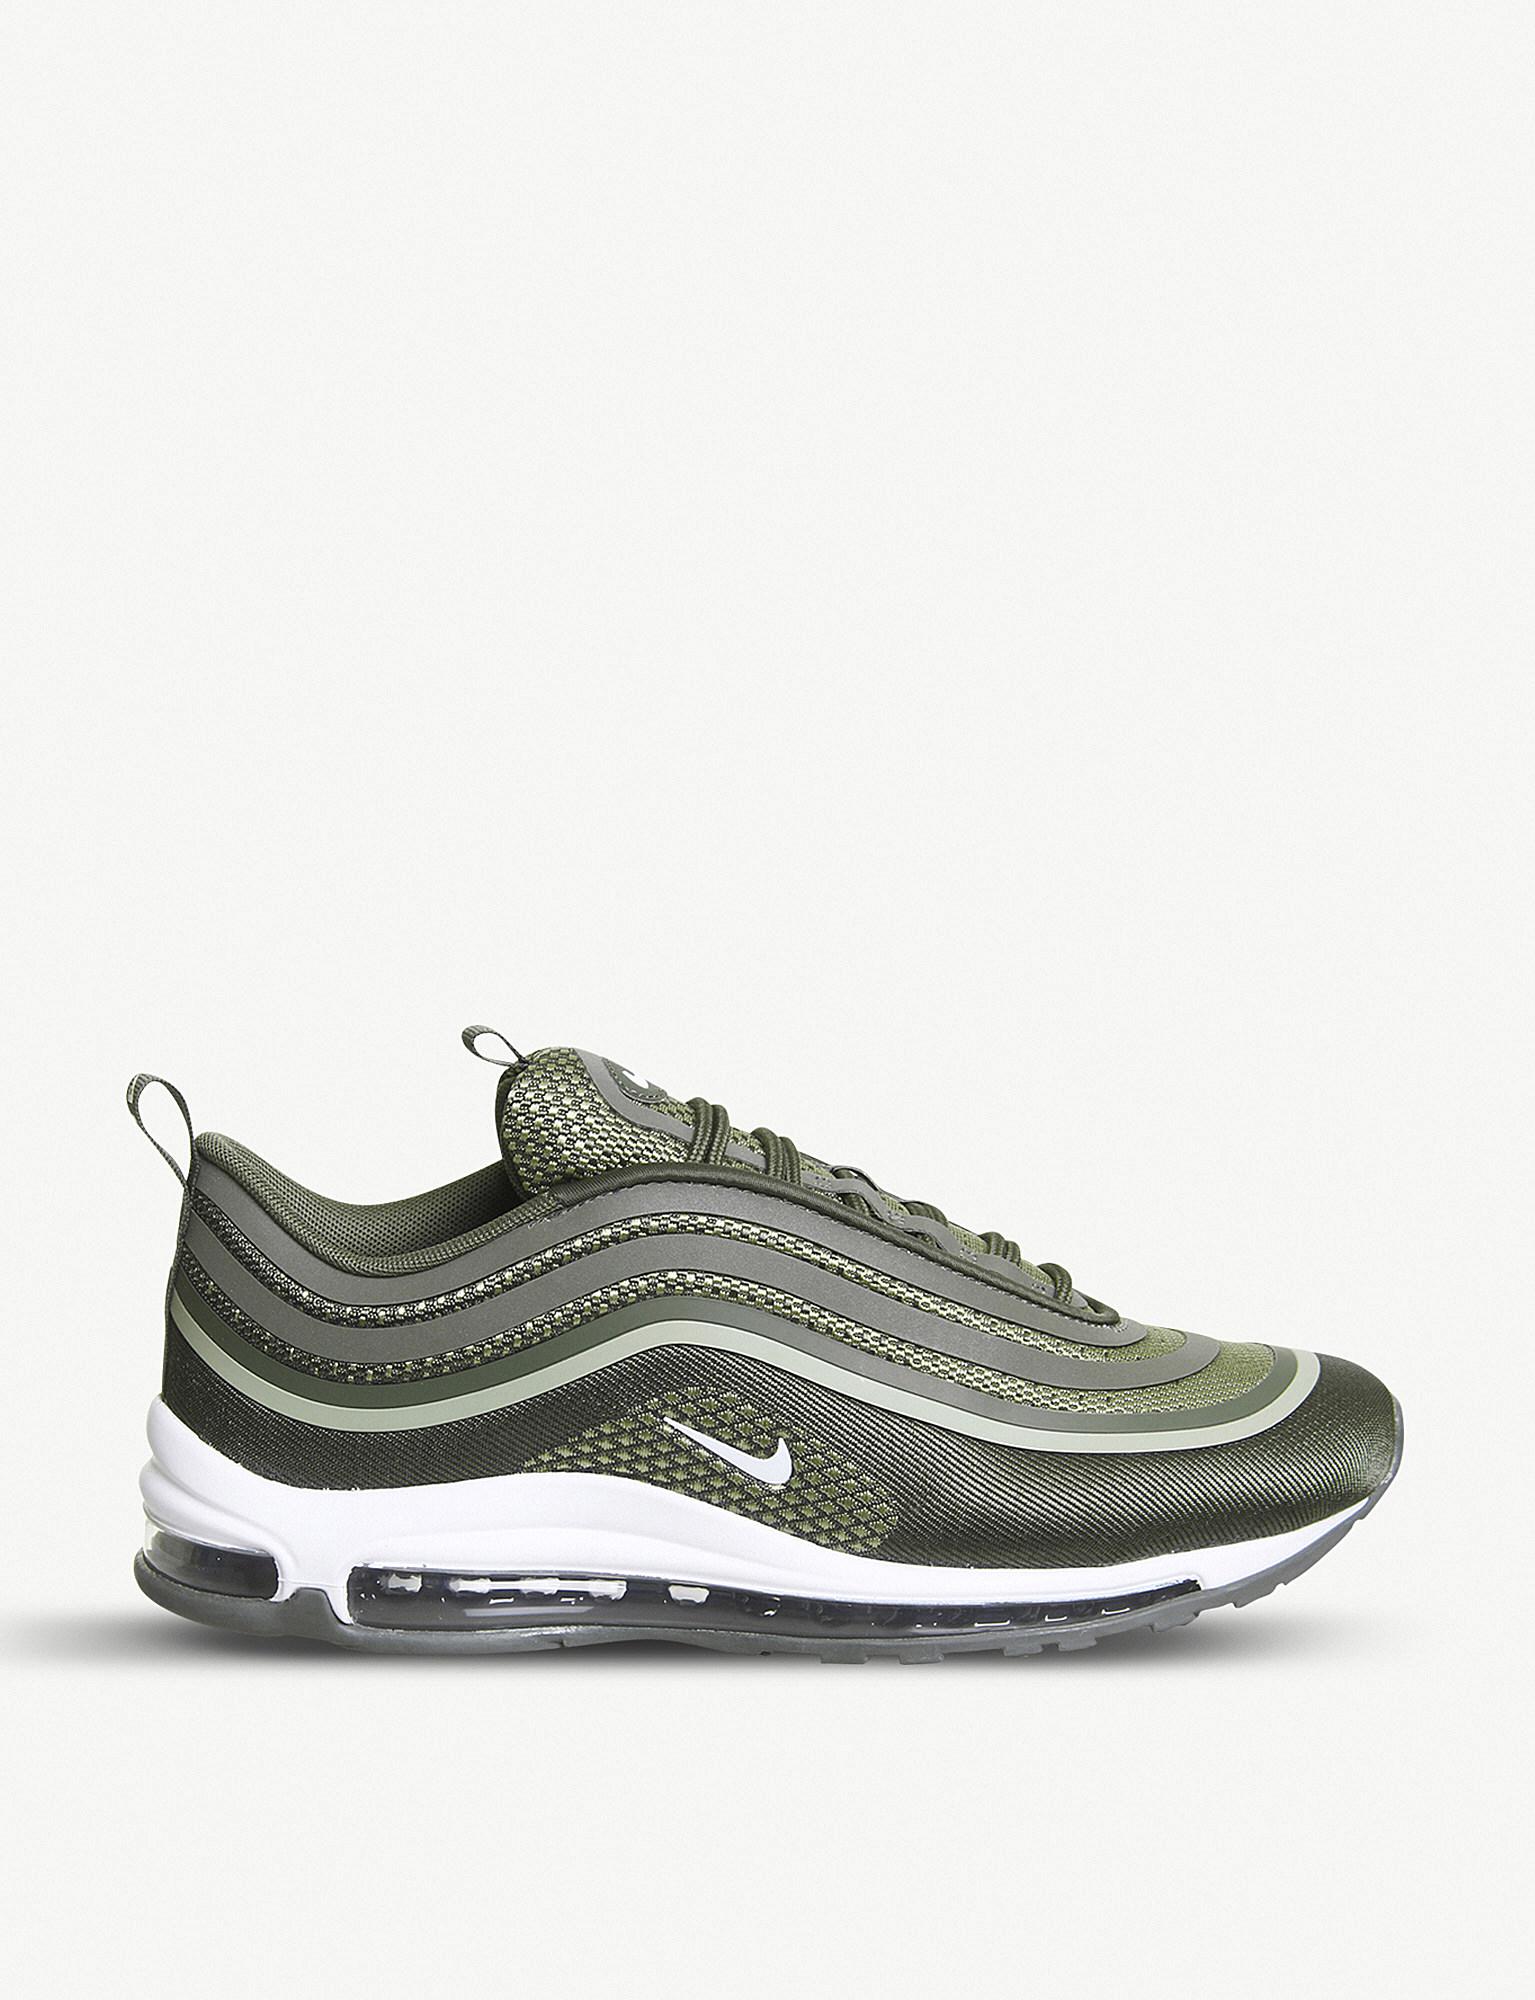 2018 Nike Air Max 97 Shoes White Red AR5531 002 For Sale